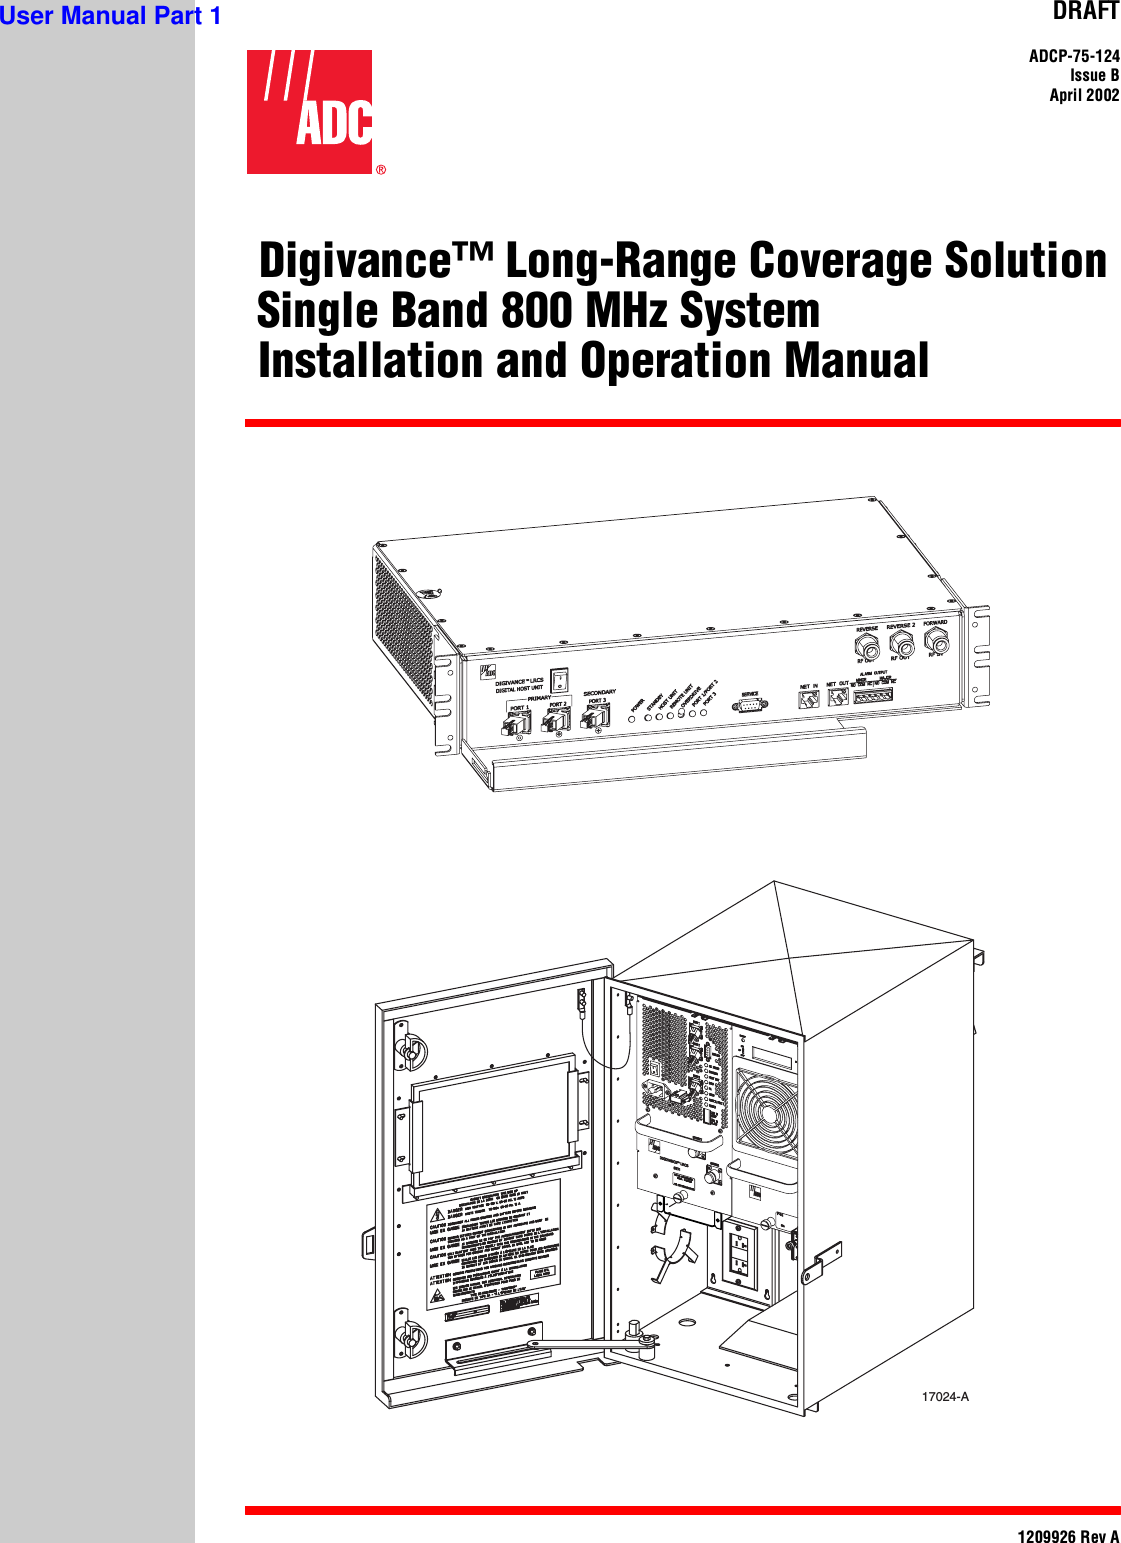 DRAFTADCP-75-124Issue BApril 20021209926 Rev A(Digivance™ Long-Range Coverage Solution Single Band 800 MHz System(Installation and Operation Manual17024-AUser Manual Part 1